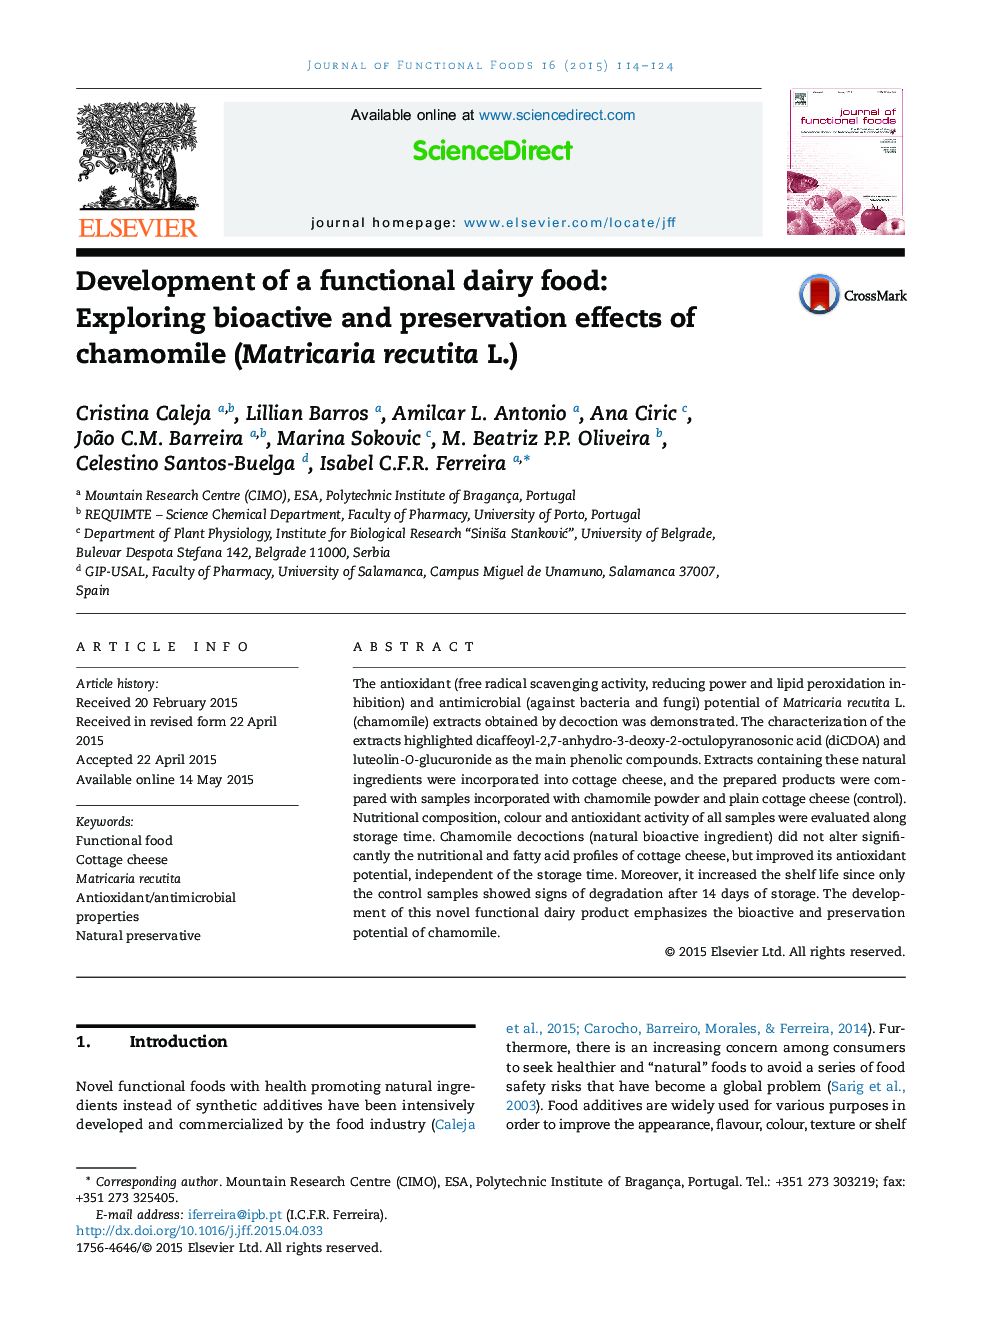 Development of a functional dairy food: Exploring bioactive and preservation effects of chamomile (Matricaria recutita L.)